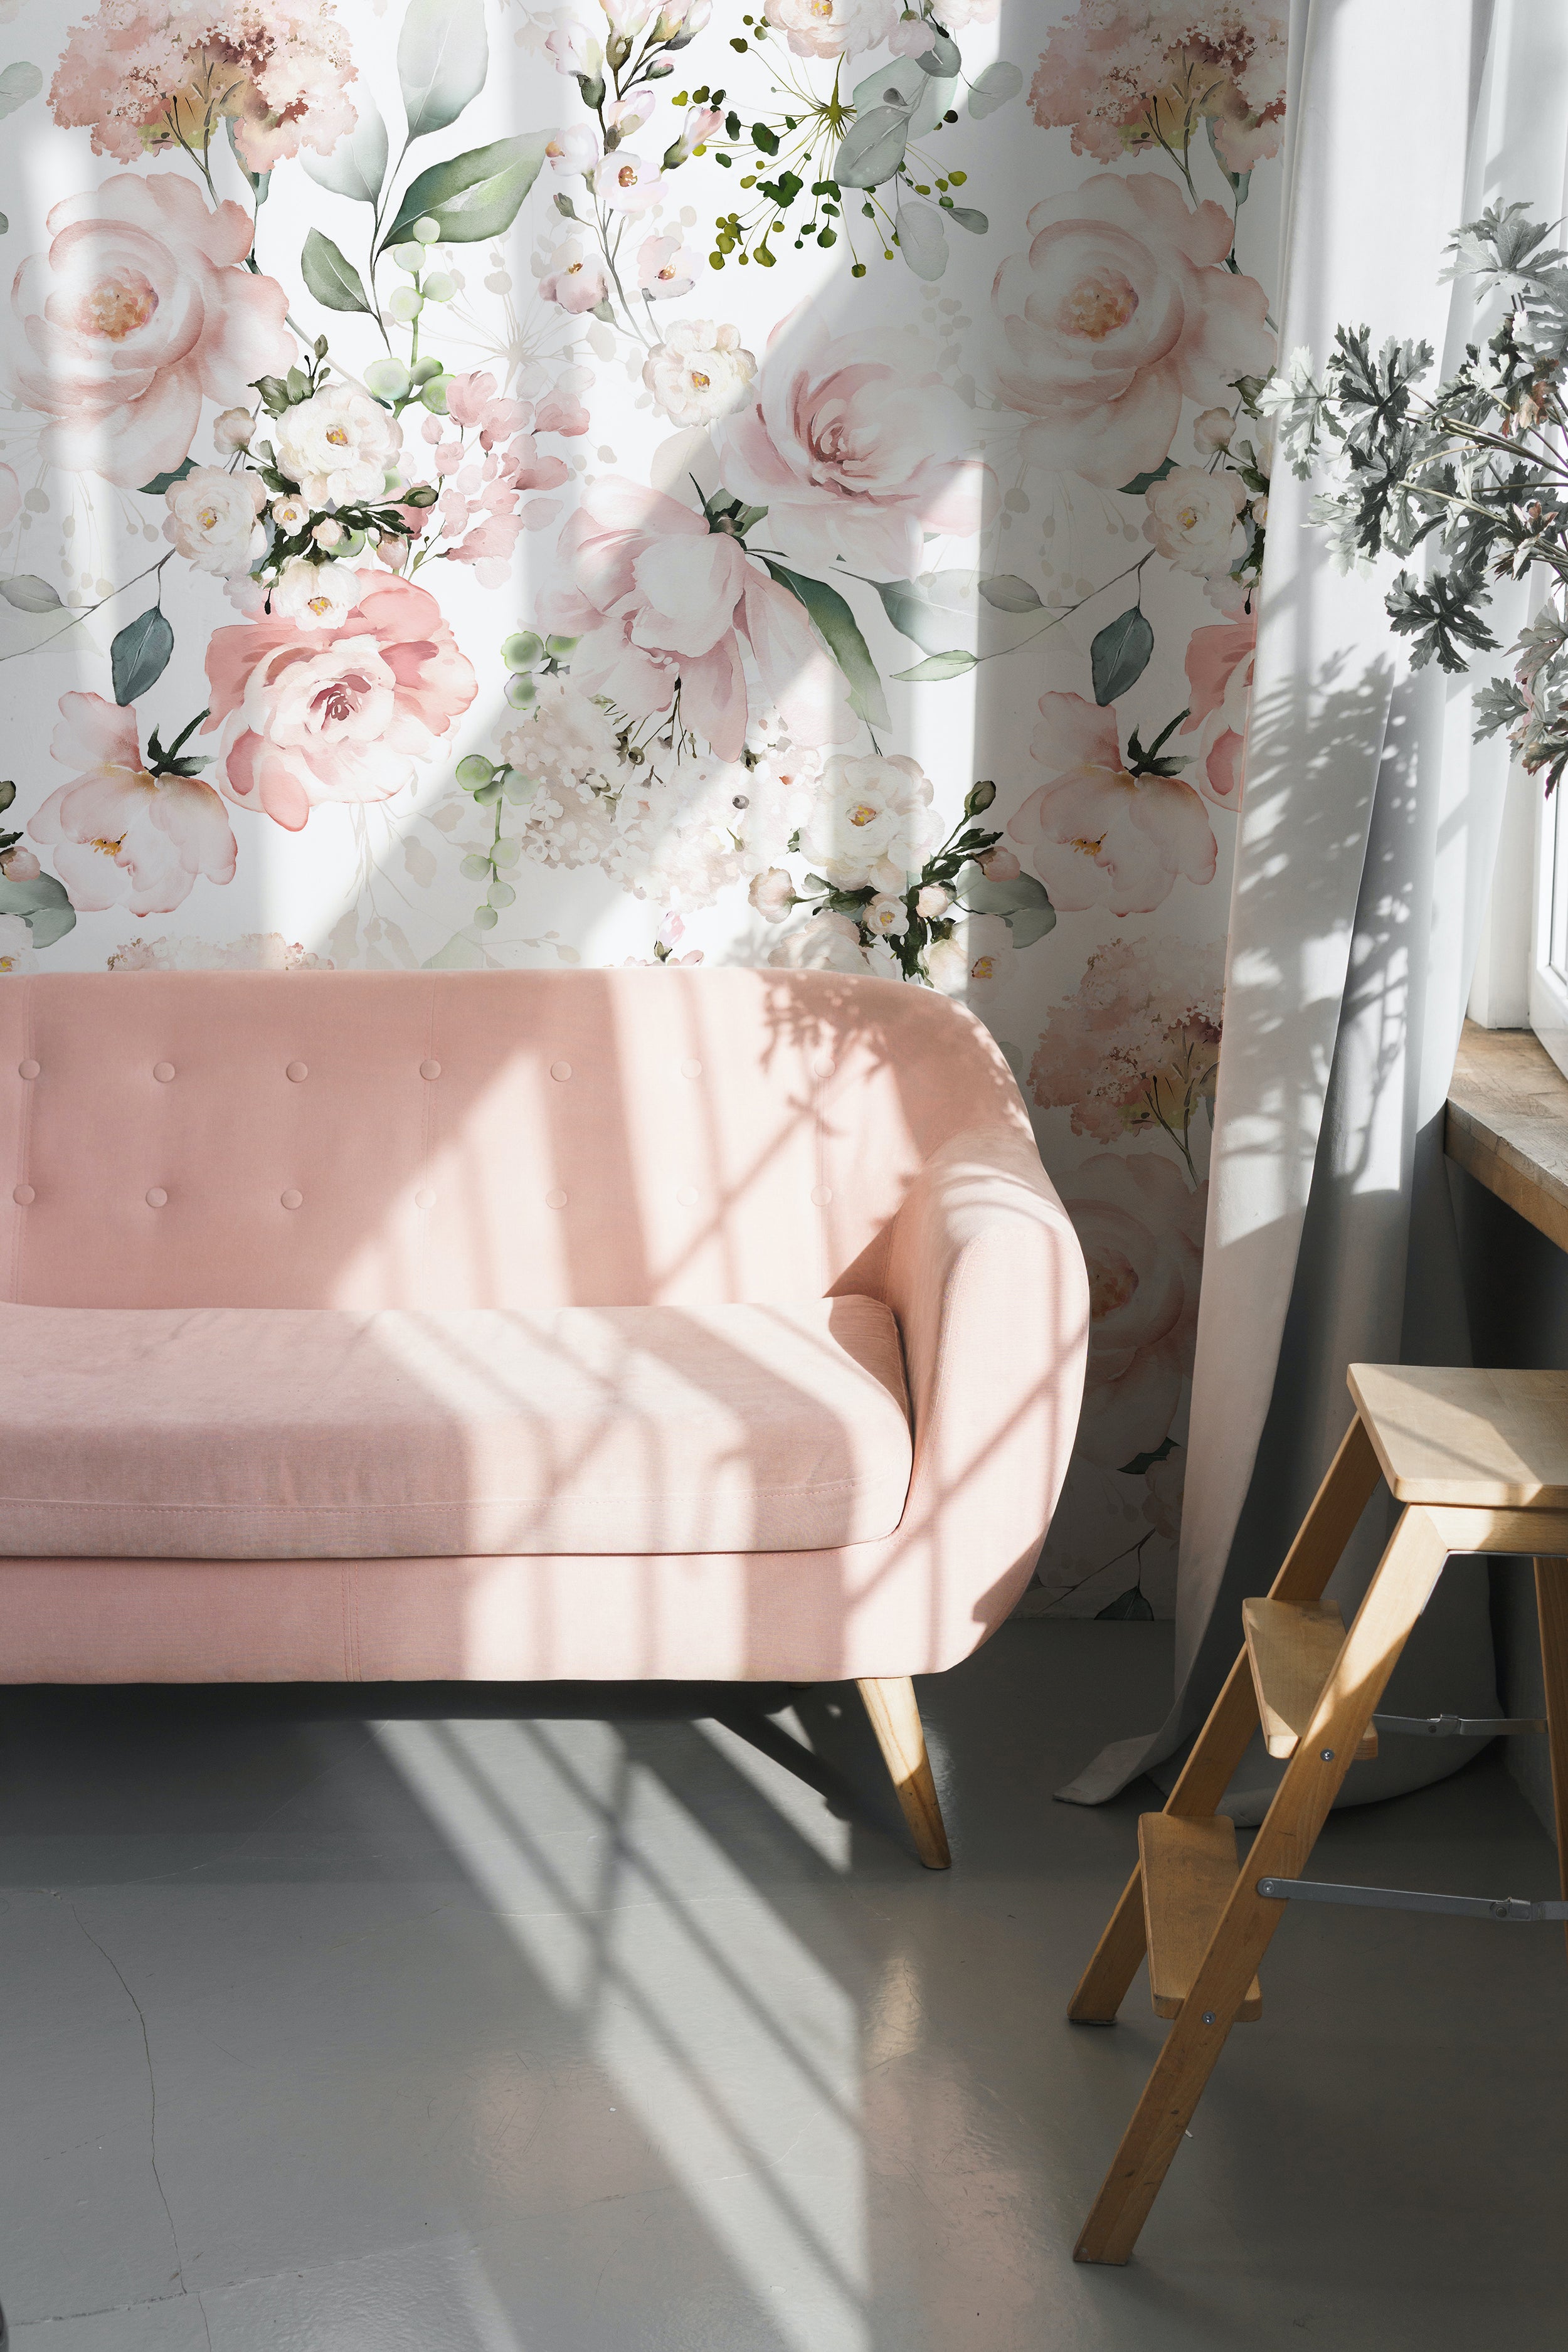 A chic living space accented with the Pink Floral and Herbs Wallpaper - 50", which adorns the wall with its lush, watercolor-style blooms and foliage. A plush pink sofa is positioned against the wallpaper, basking in the natural light that filters through a window, highlighting the soft, pastel colors of the floral pattern.